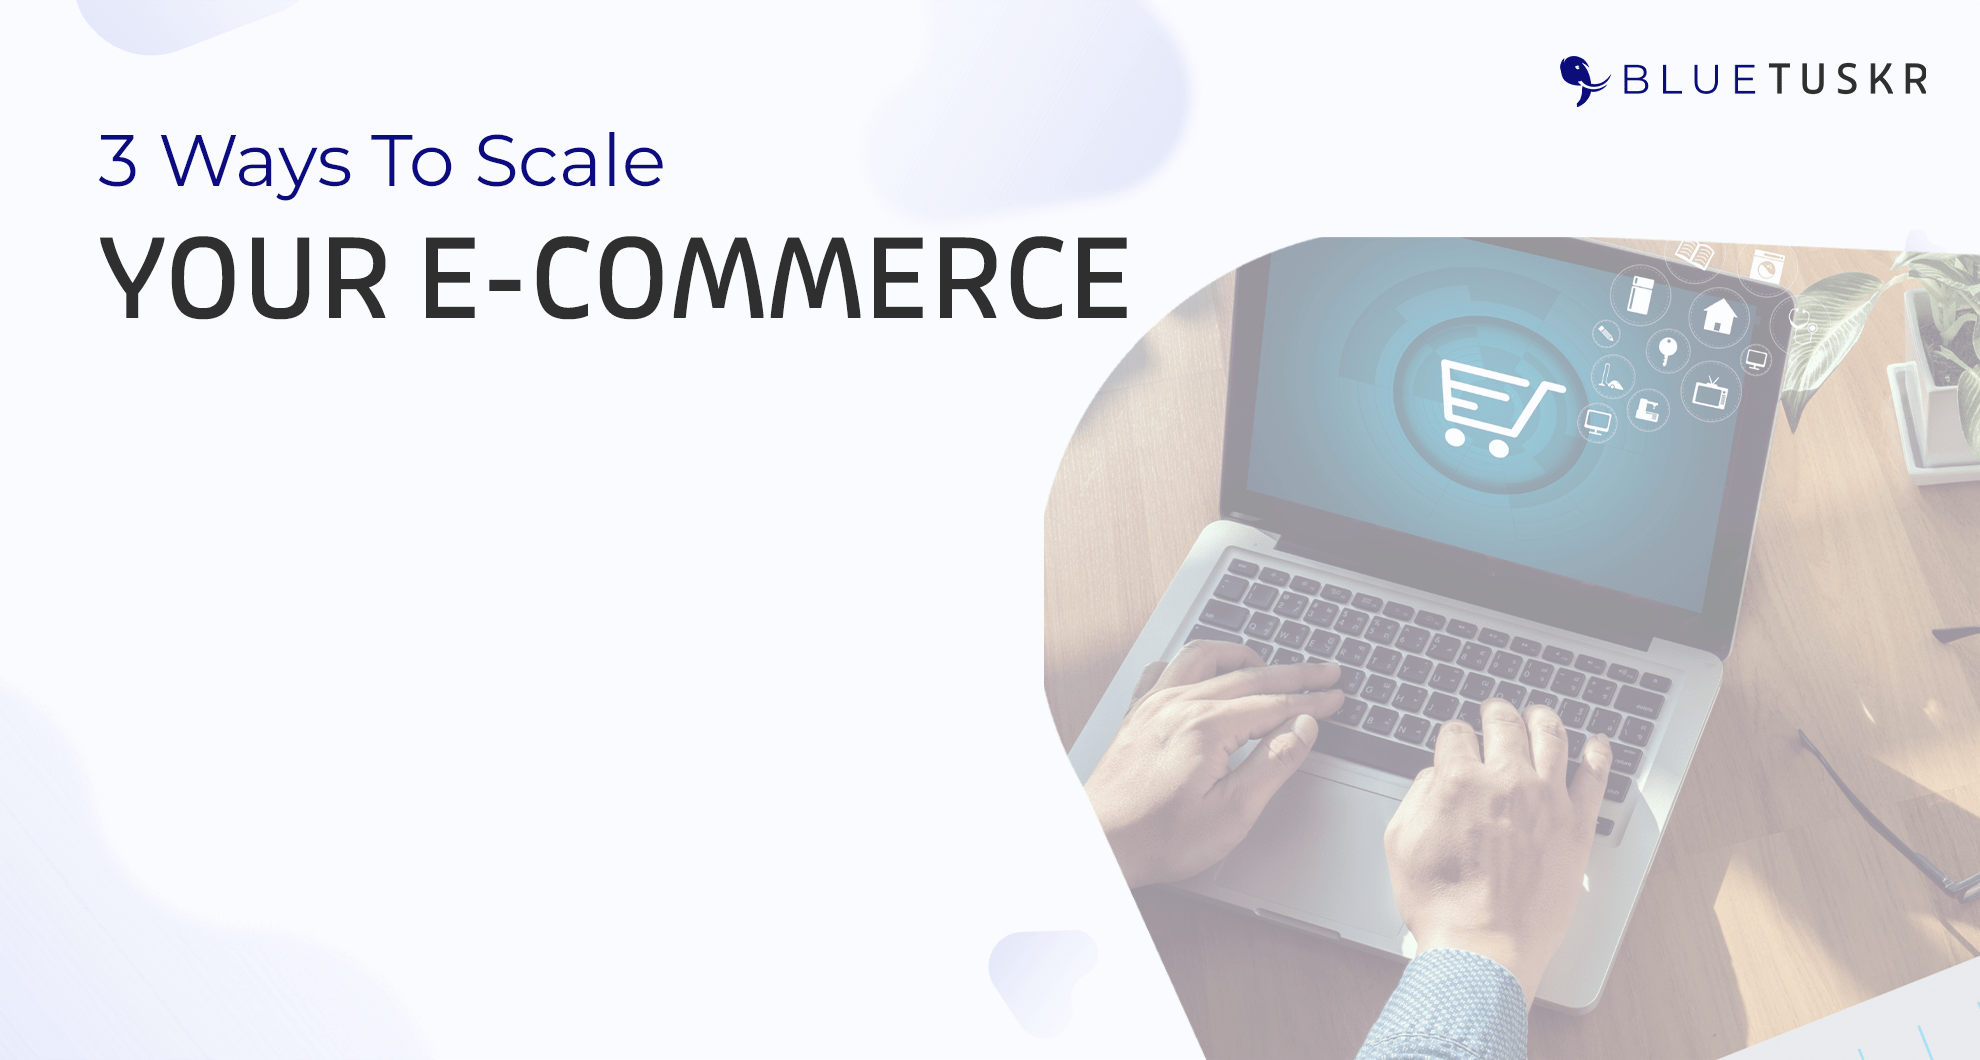 3 WAYS TO SCALE YOUR E-COMMERCE BUSINESS